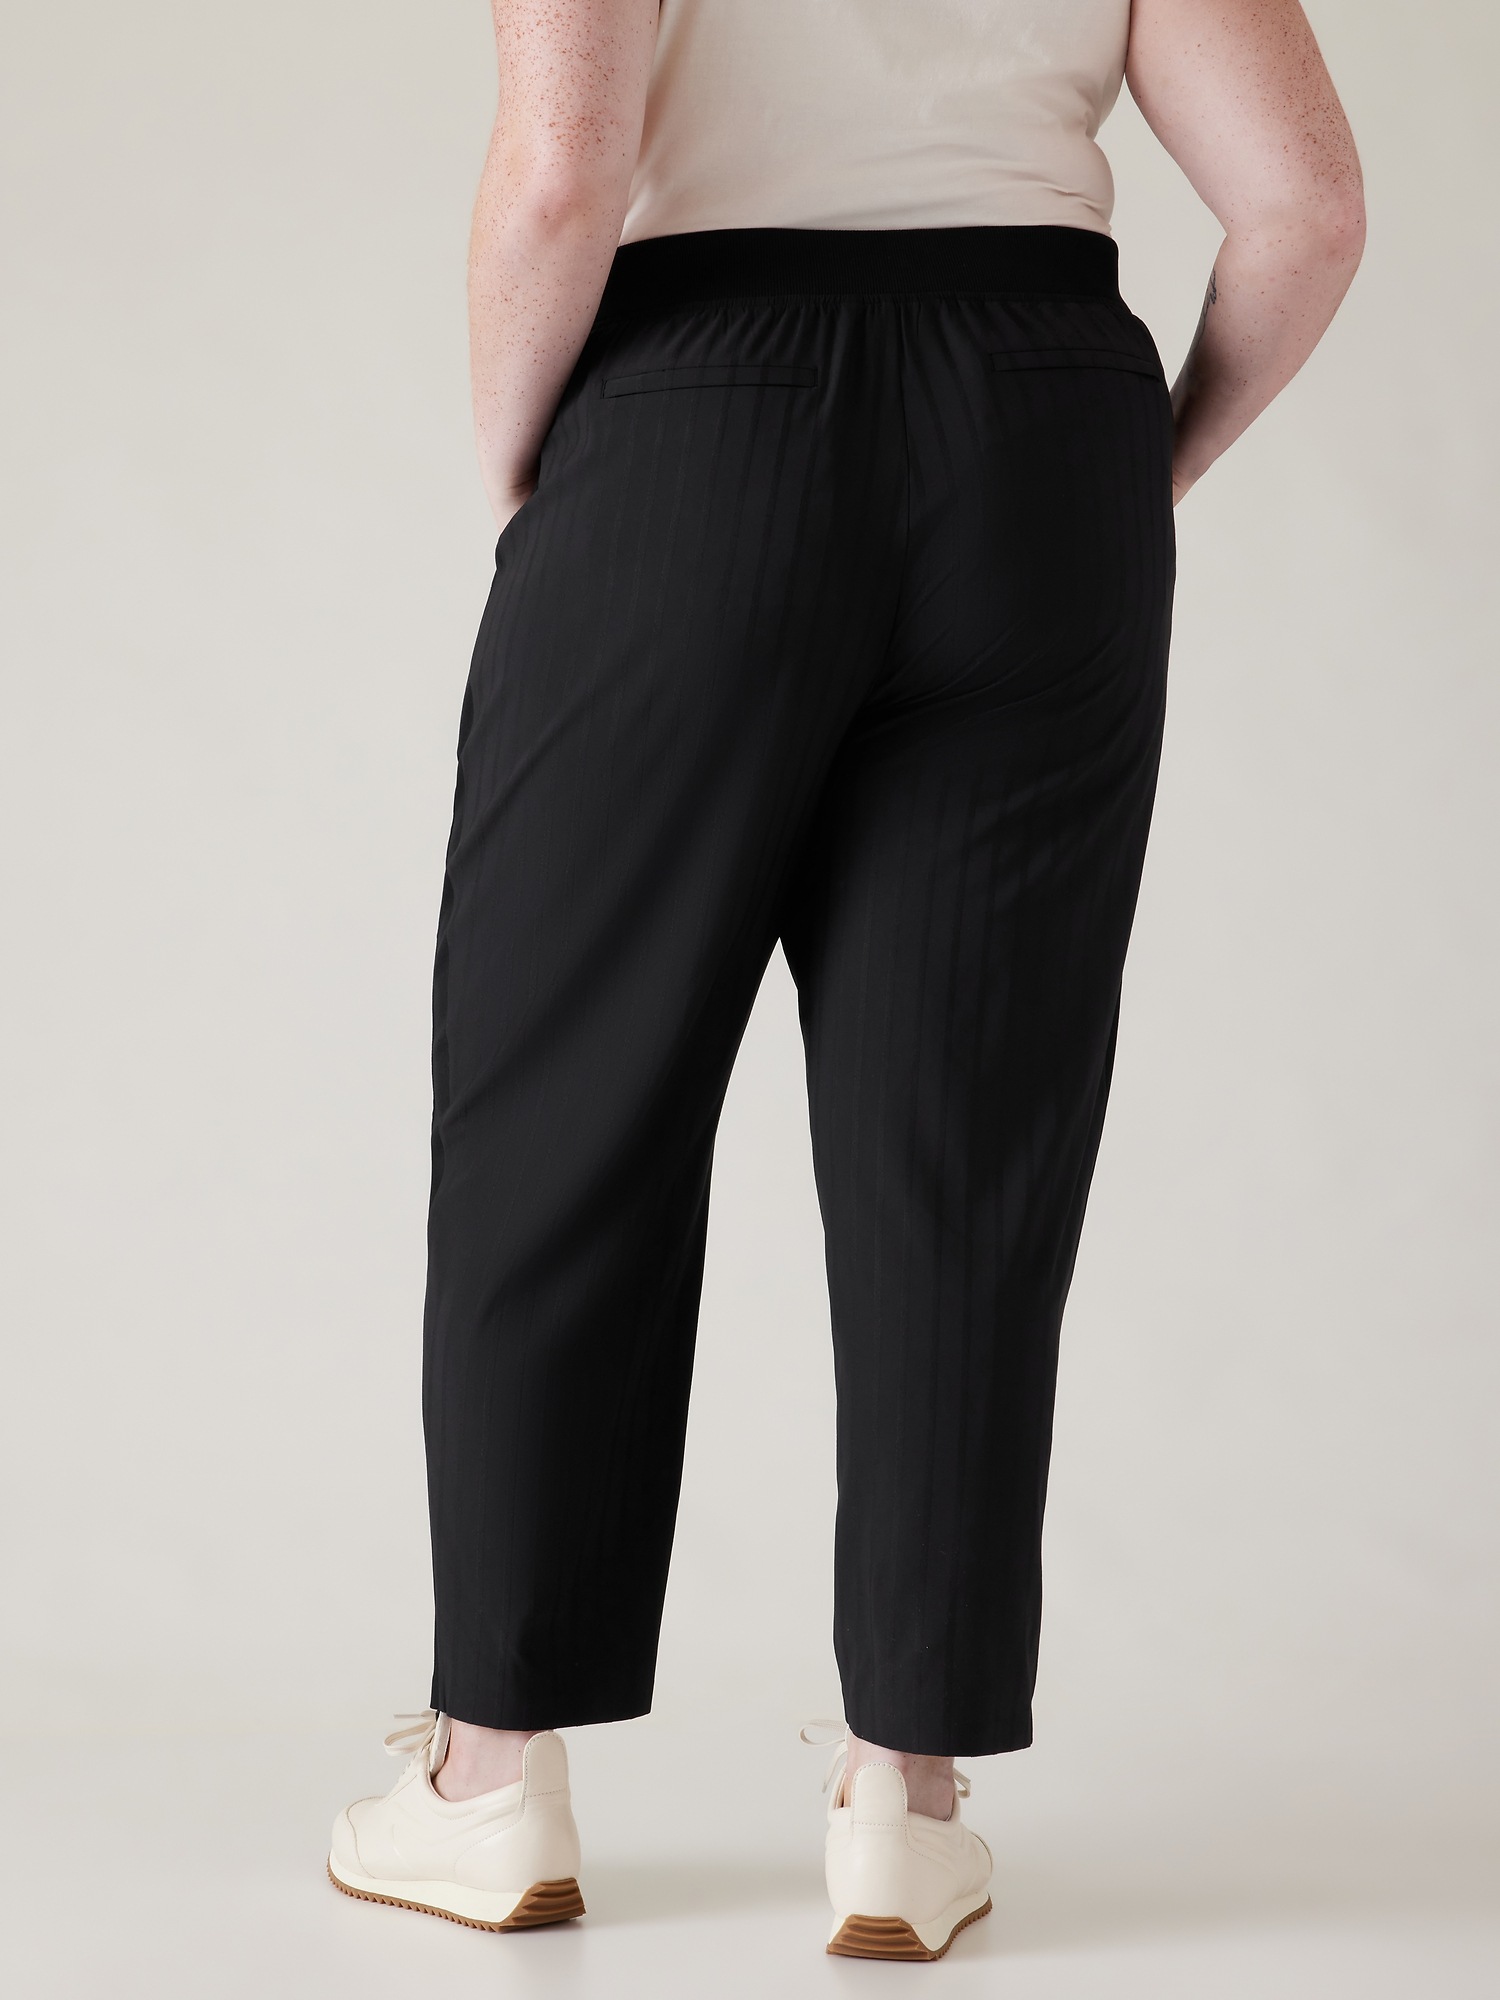 ad #athleta Brooklyn Ankle Pant is so versatile and a wardrobe staple, brooklyn ankle pants